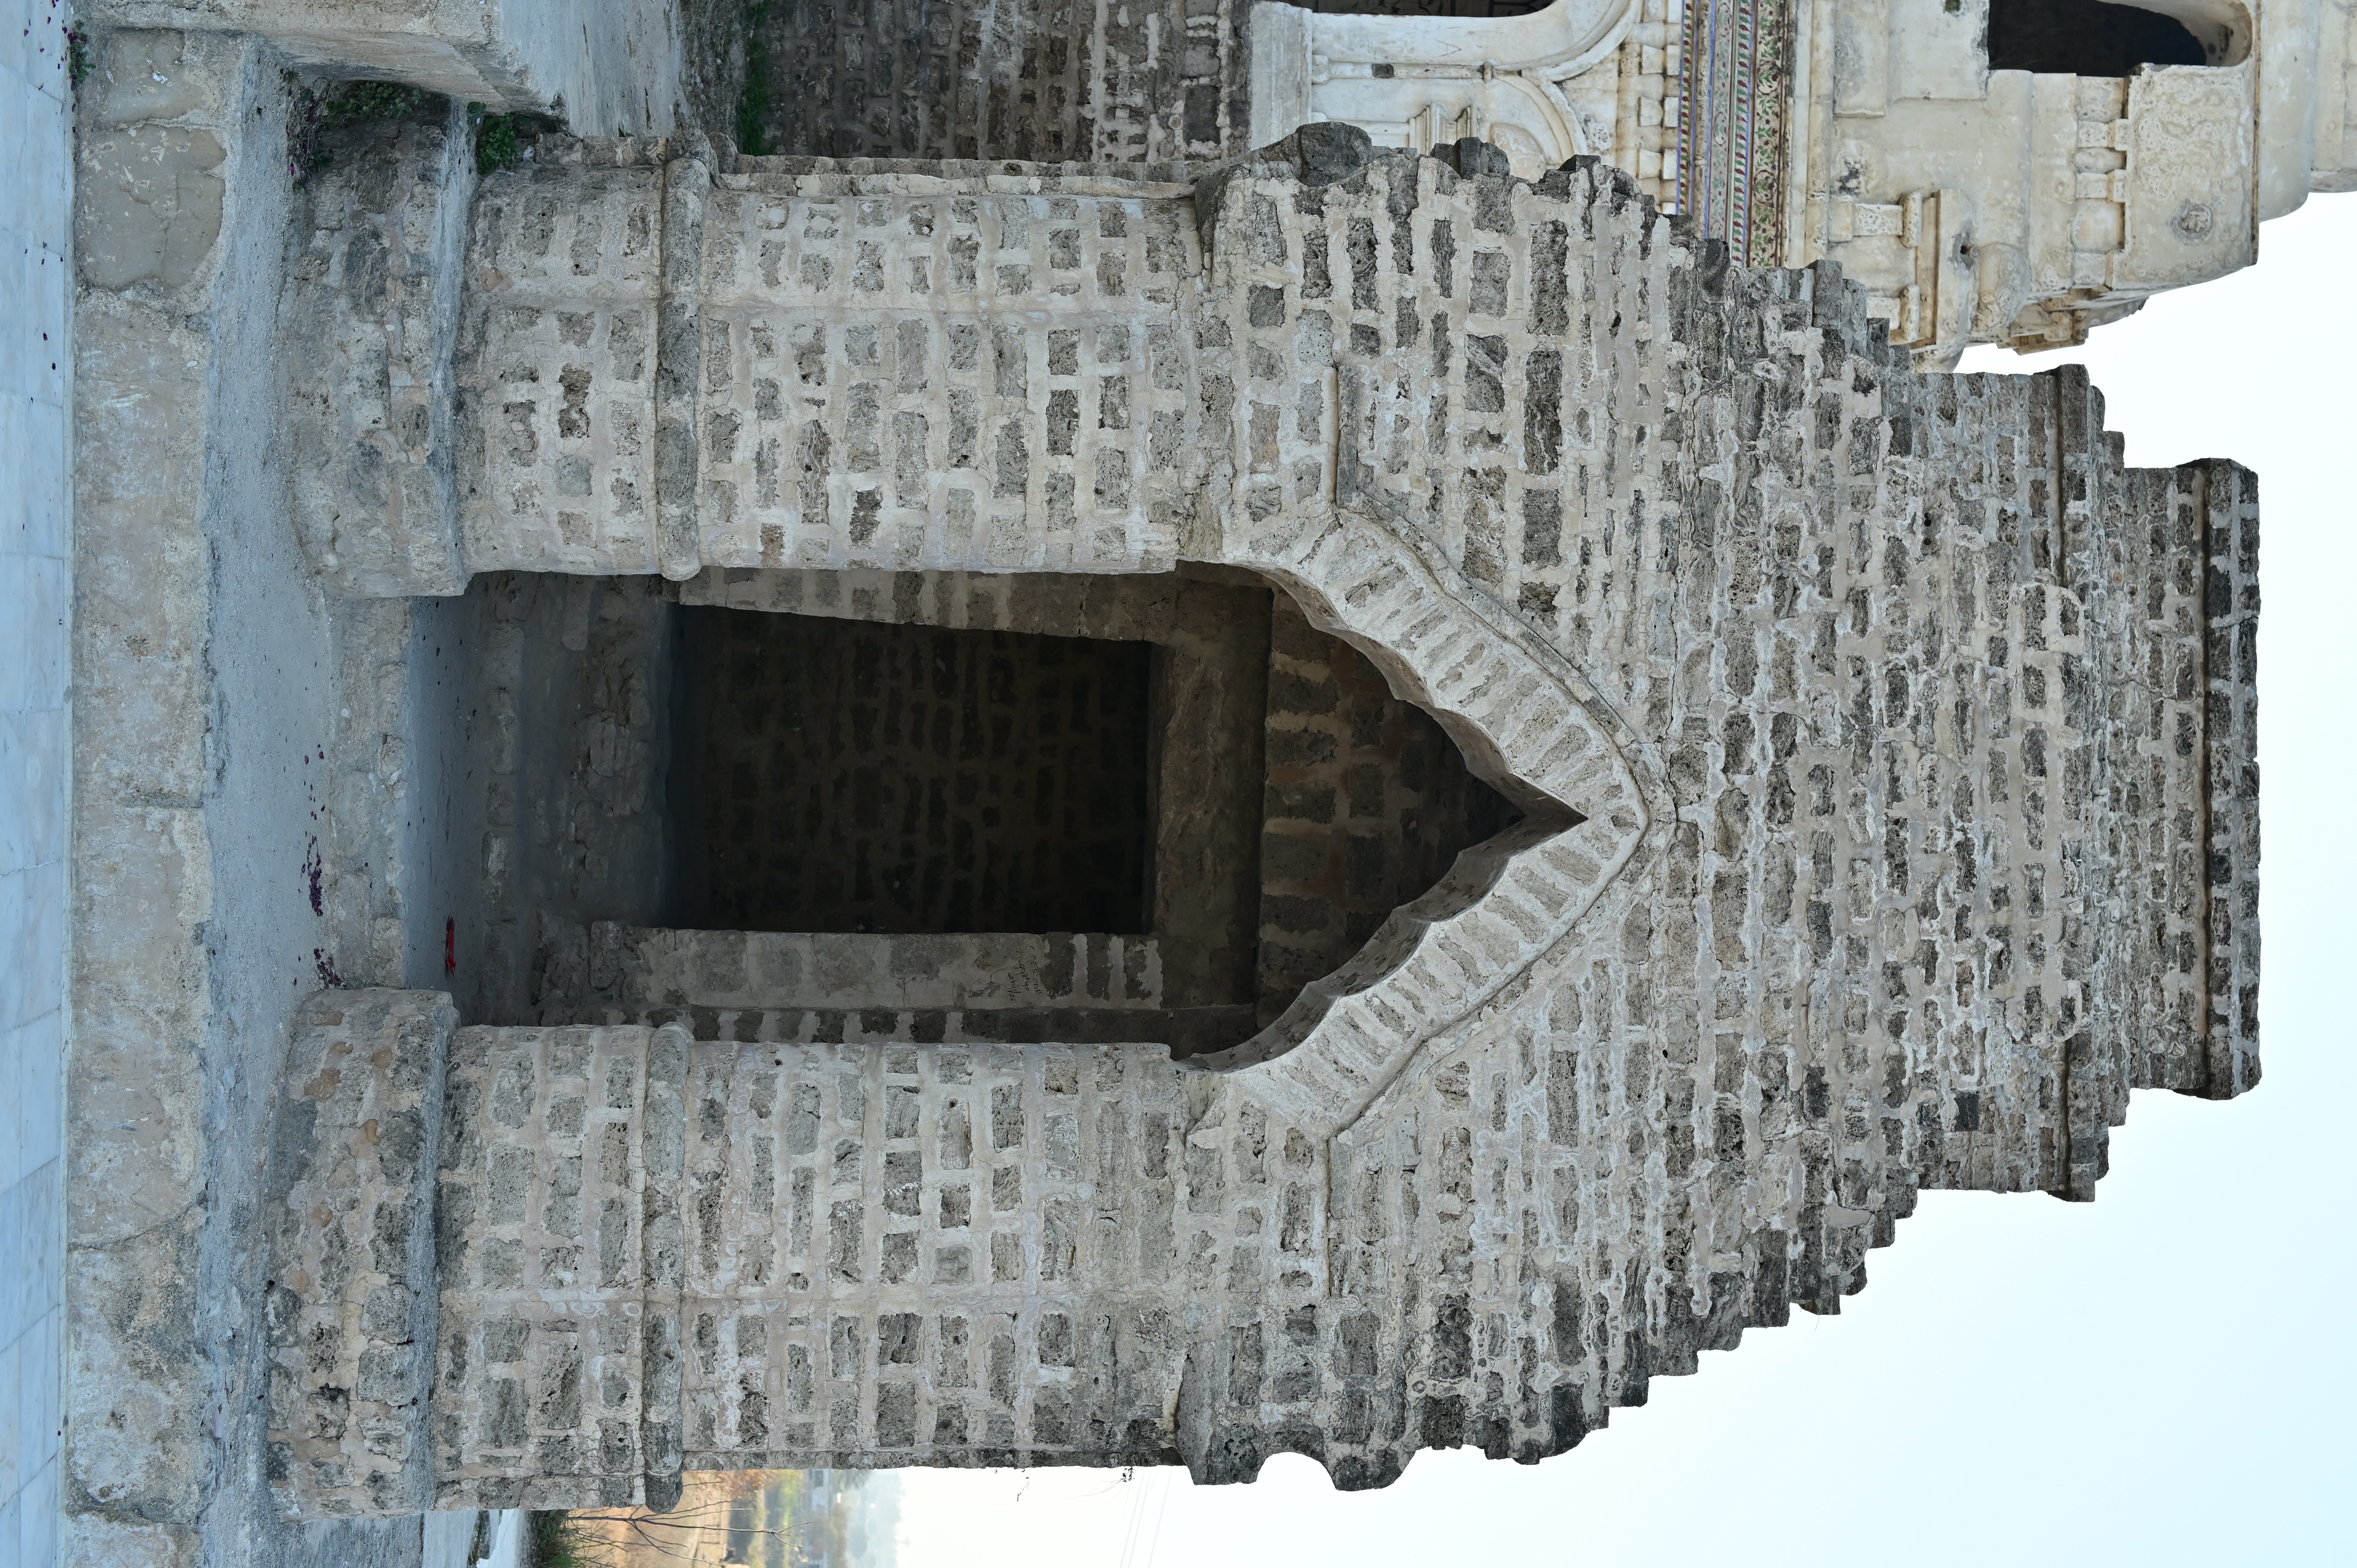 The walkway connecting one temple with another at Katas Raj